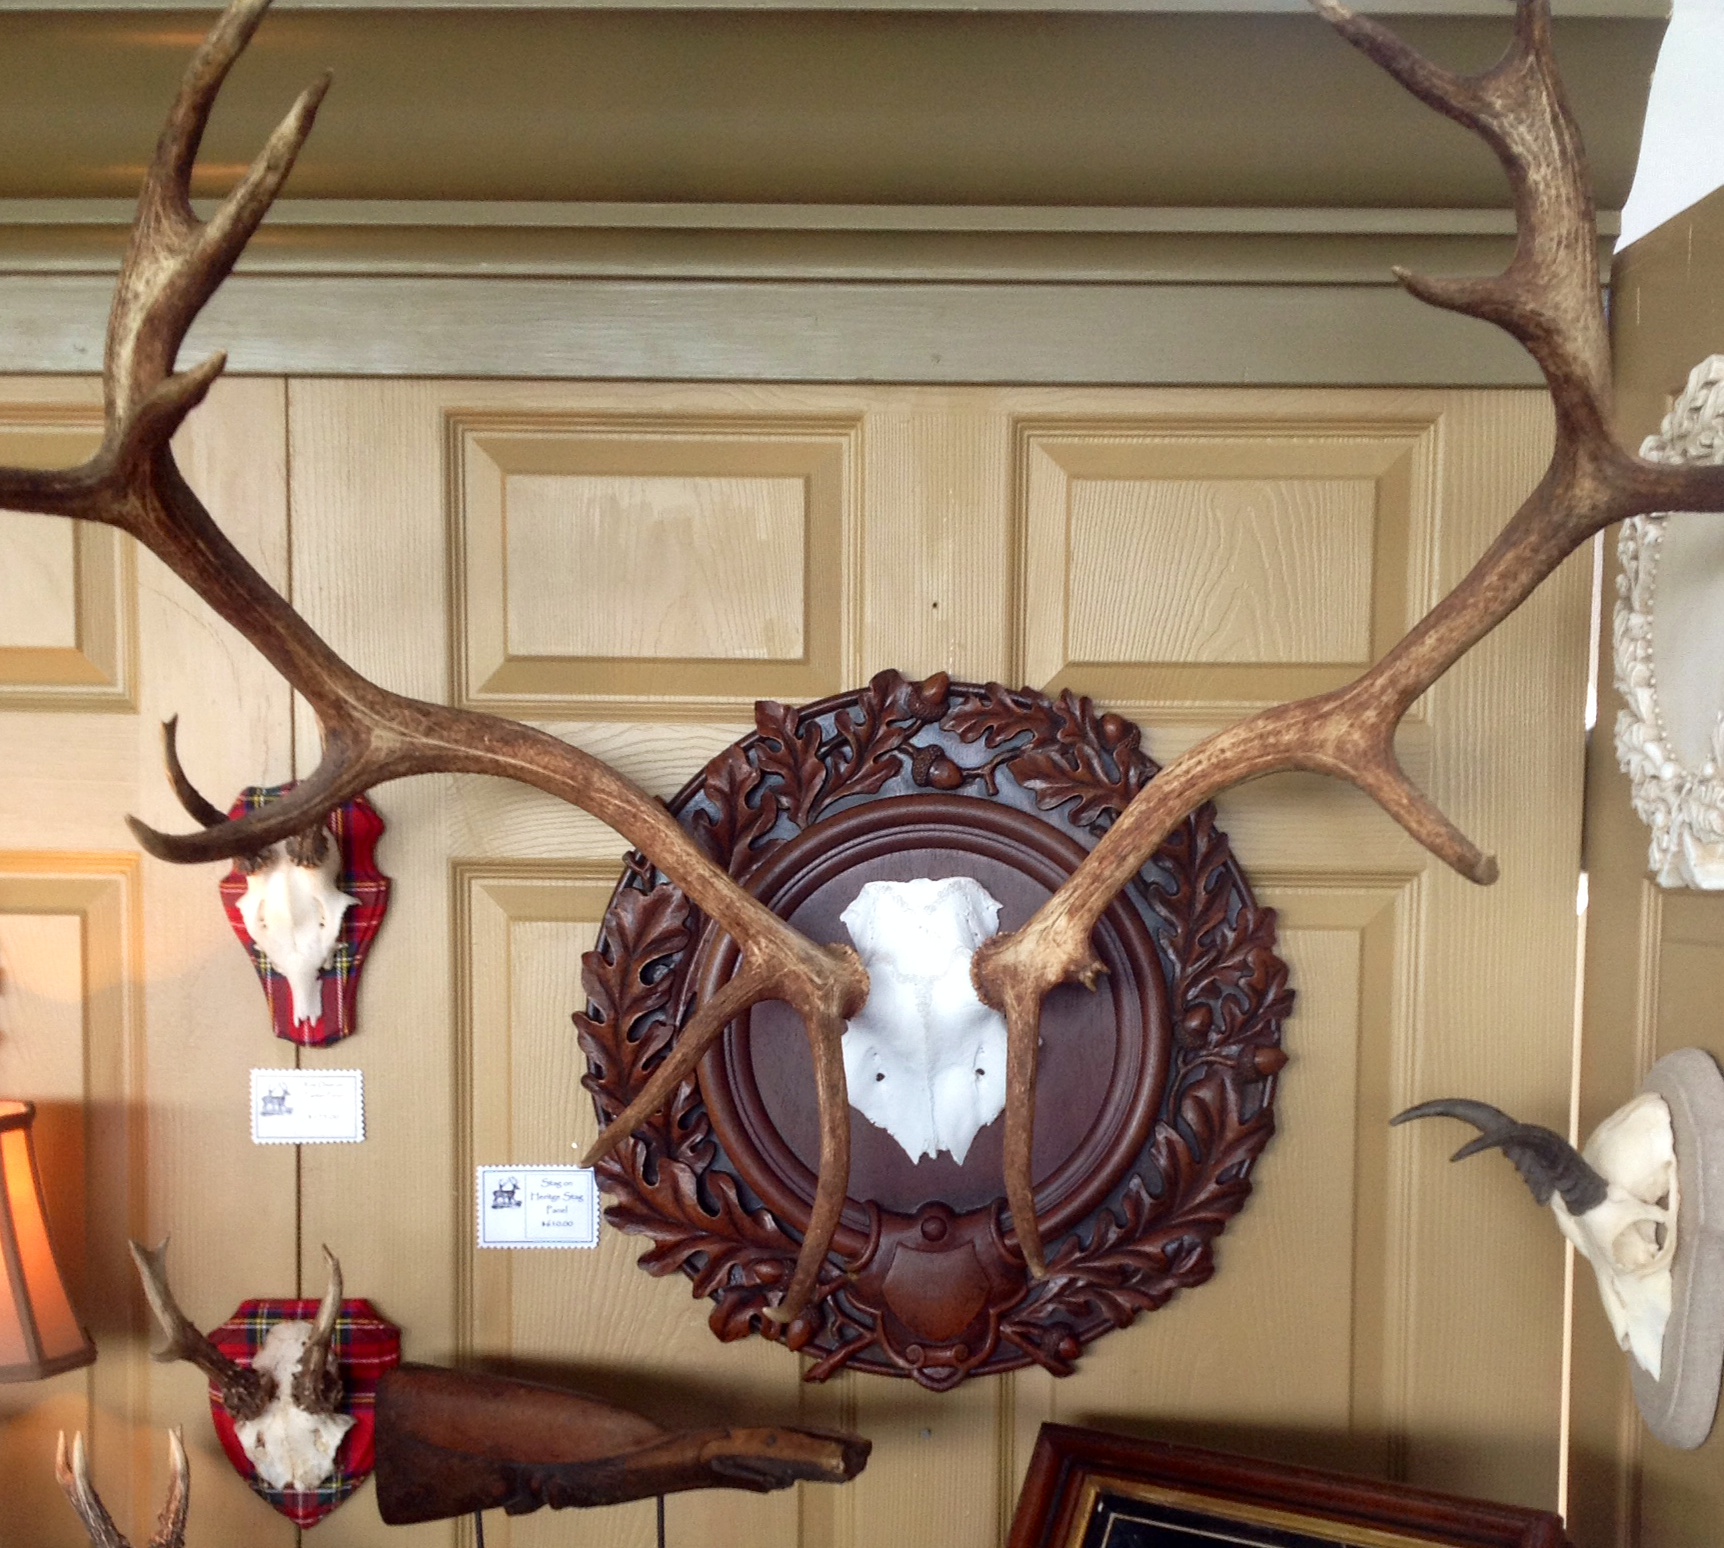 ‘The Heritage Stag’ with antlers